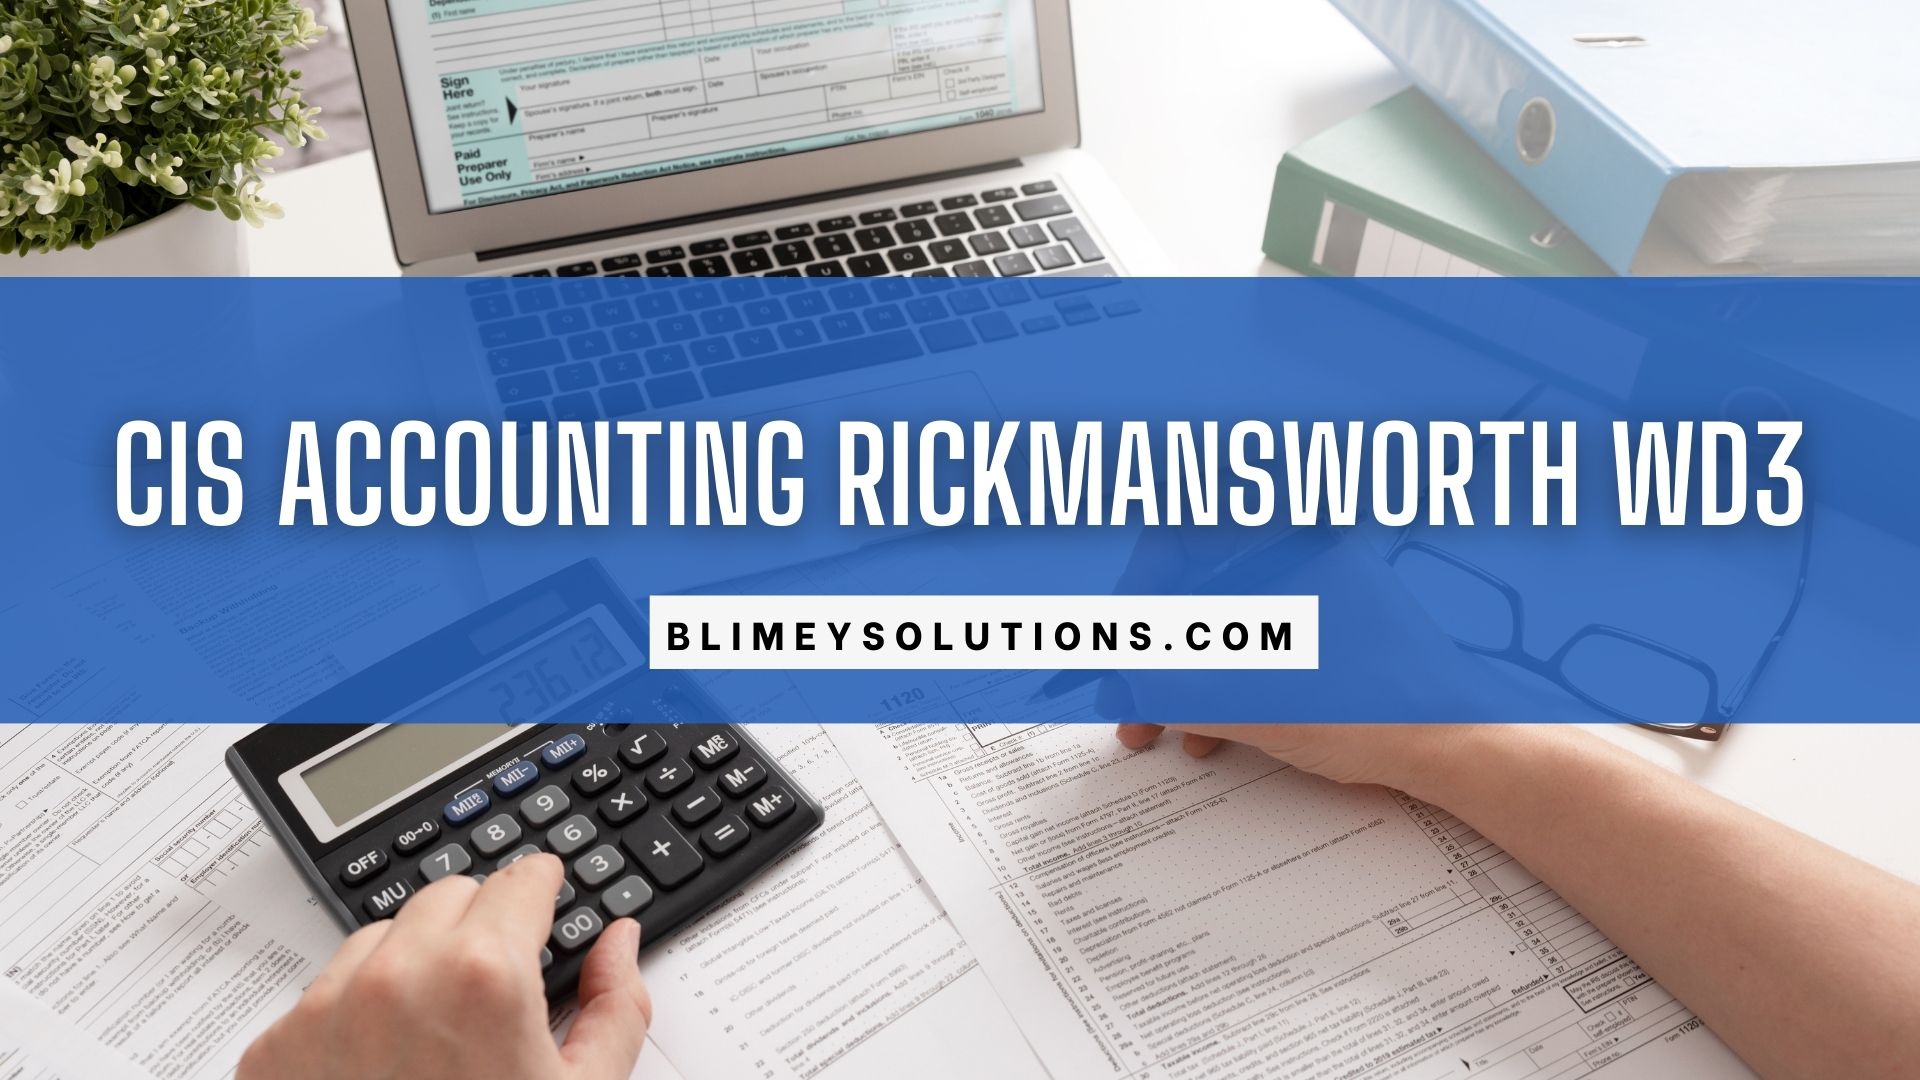 Cis Accounting In Rickmansworth Wd3 London